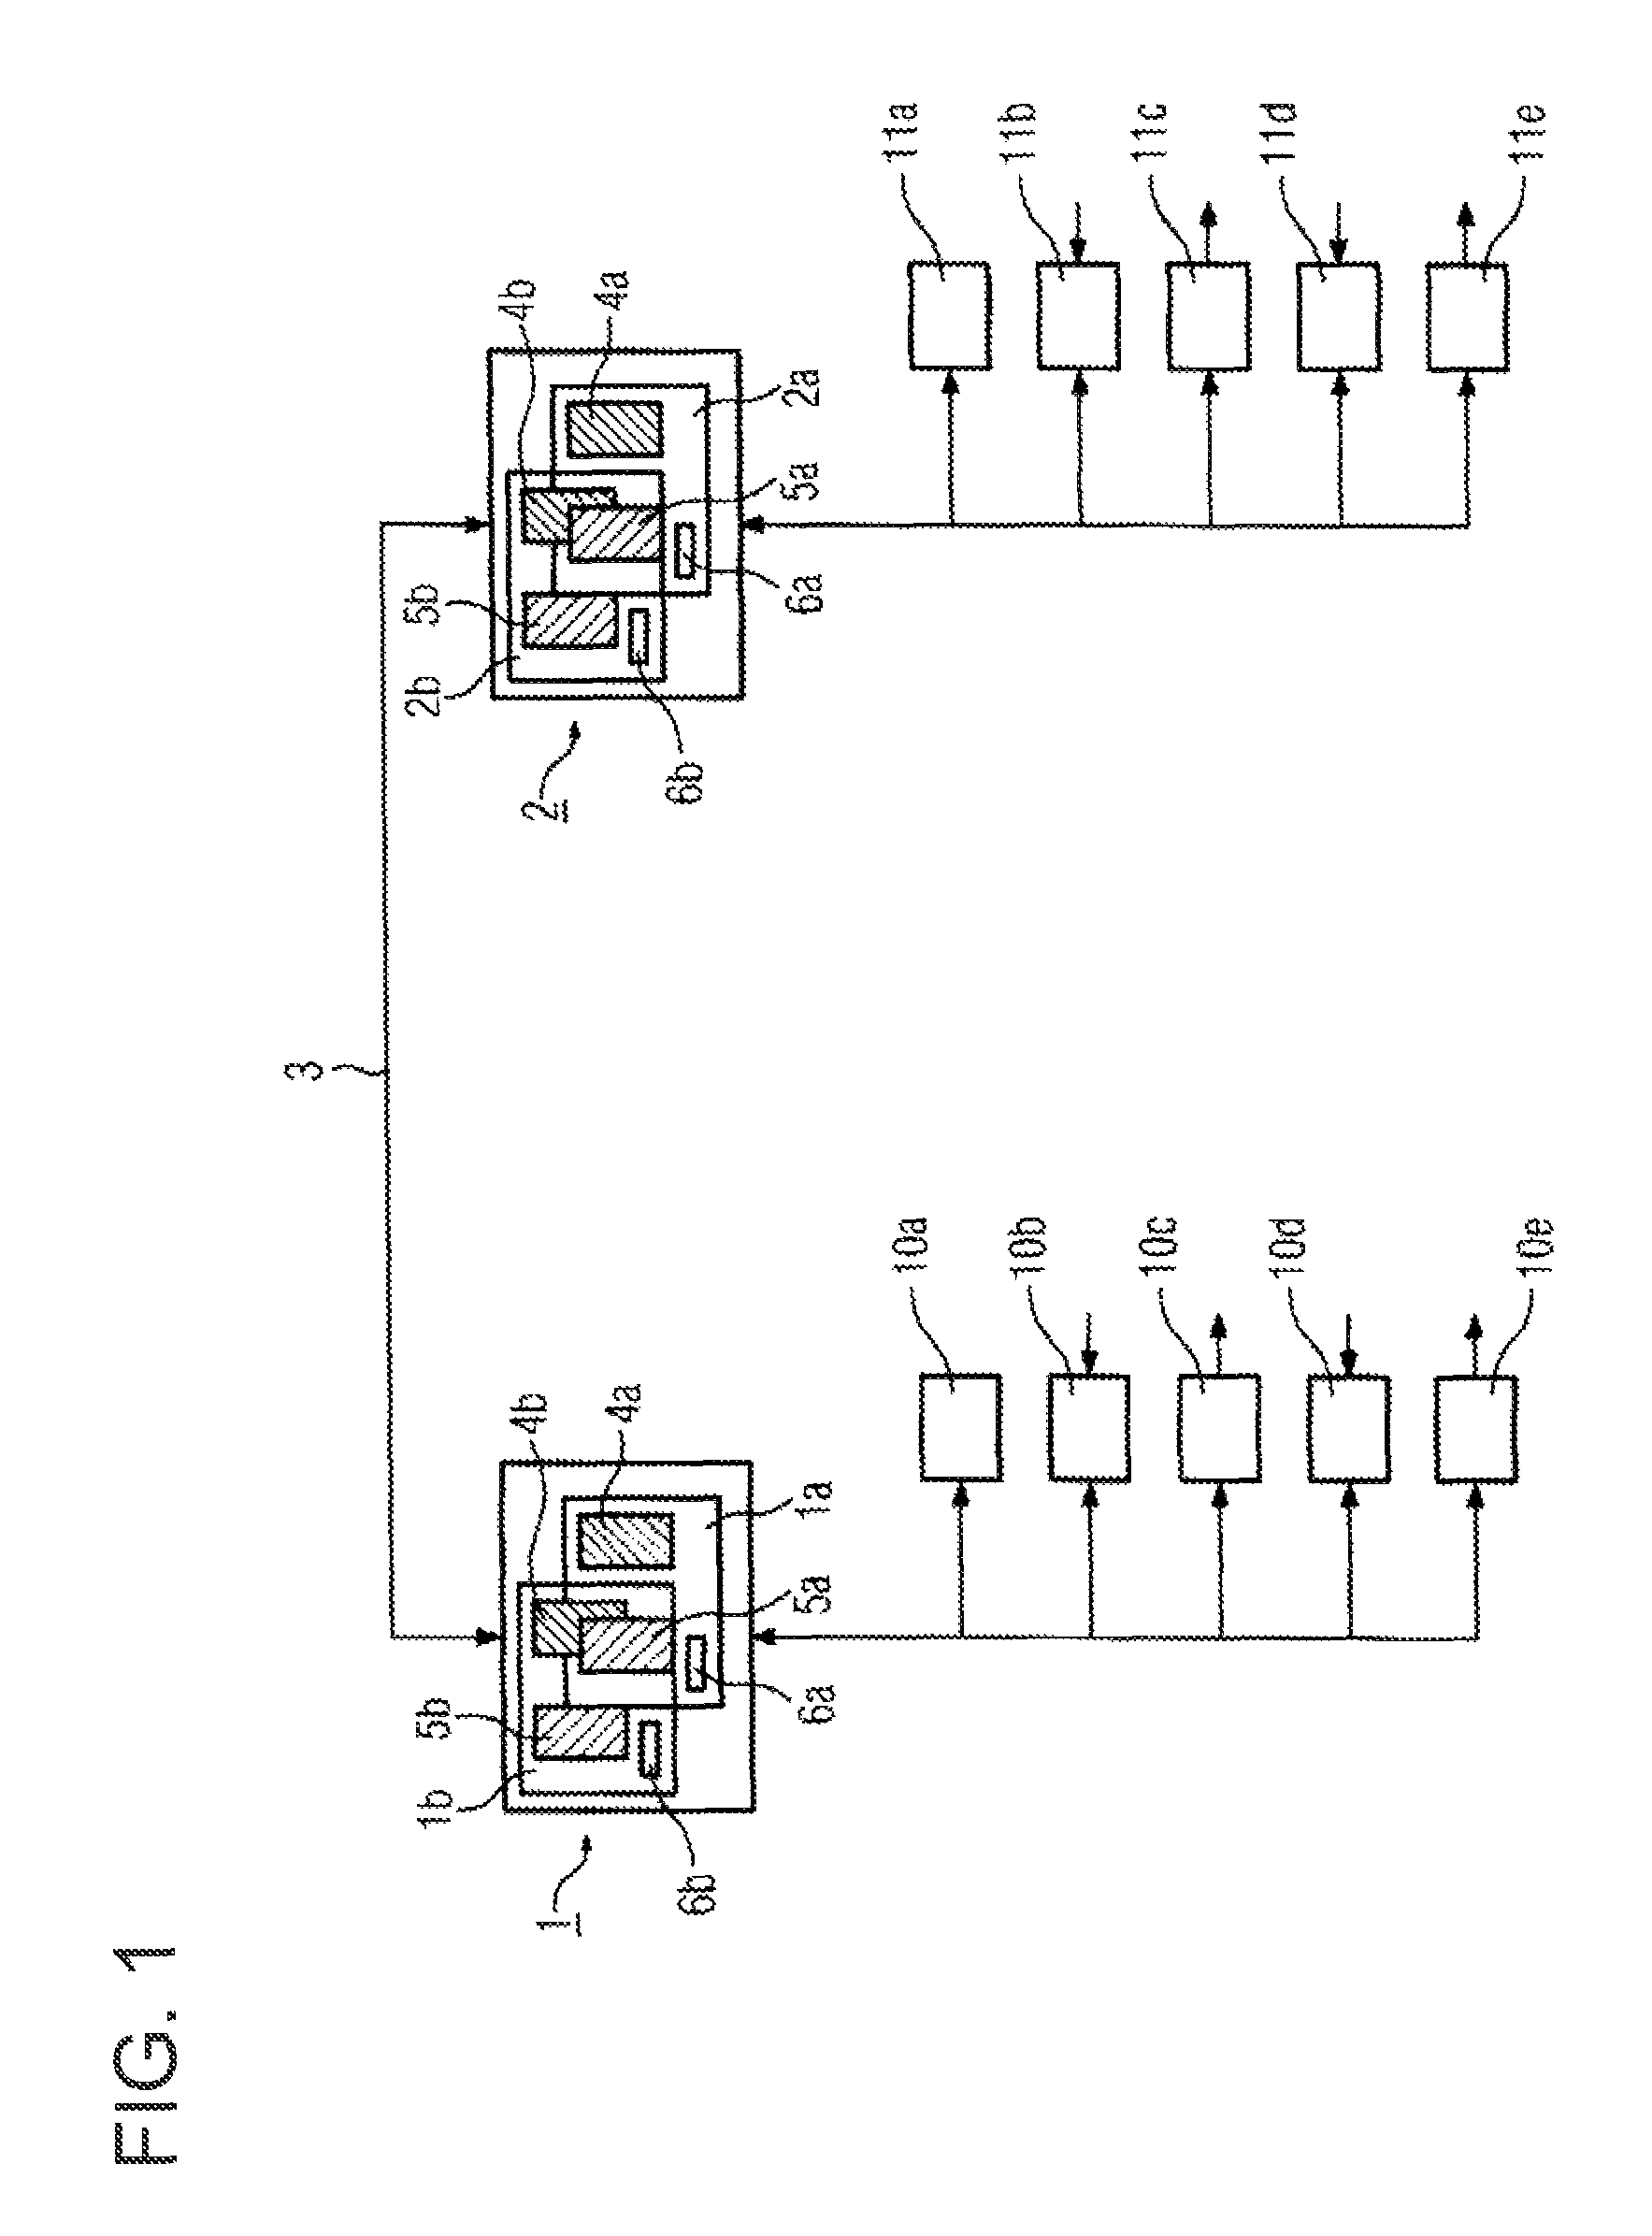 Control system, control computer and method for operating a control system